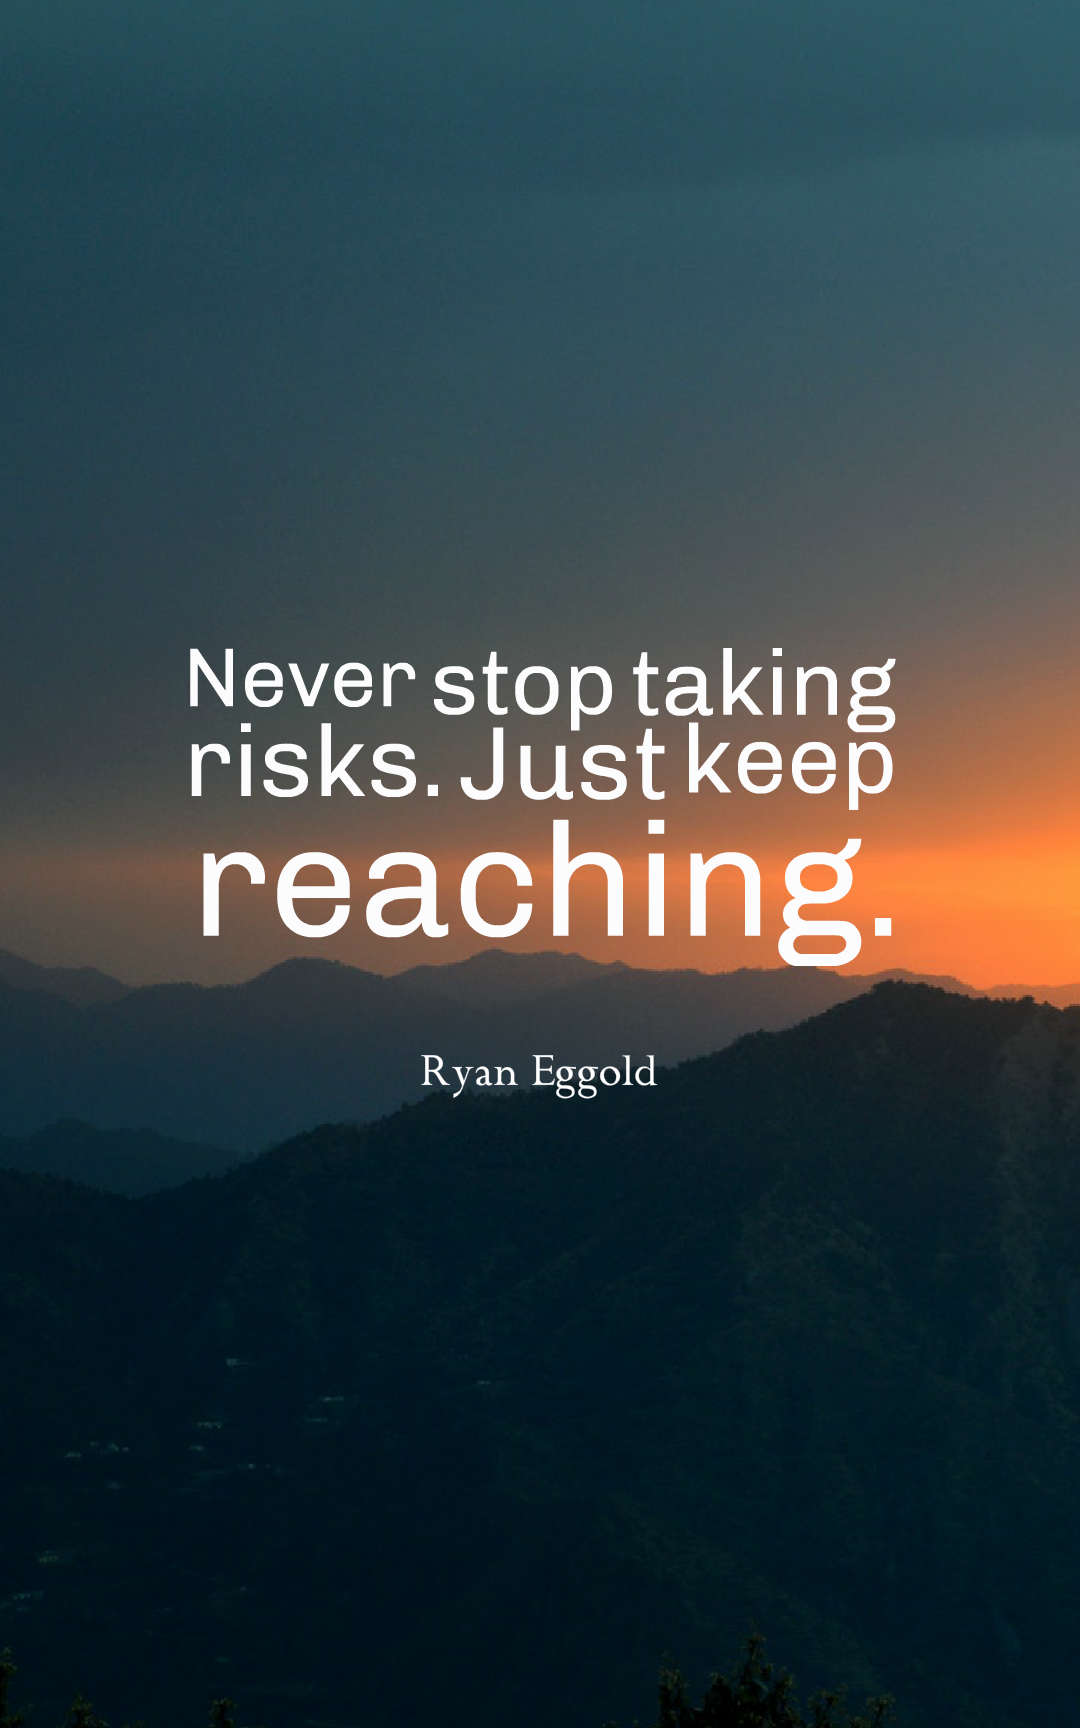 Never stop taking risks. Just keep reaching.